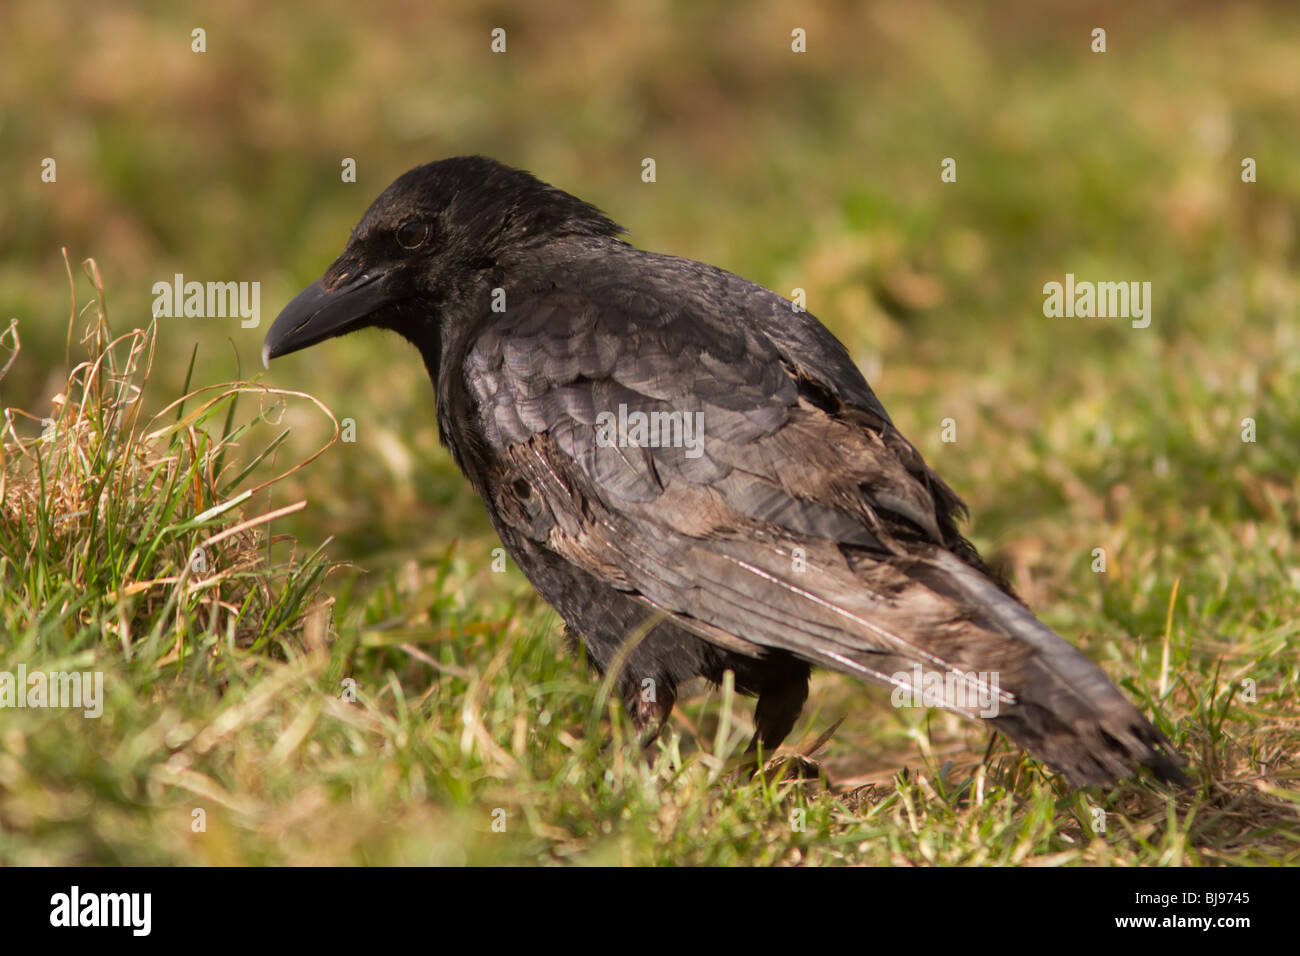 A very trusting crow who didn't seem to be bothered by my presence at all. Stock Photo